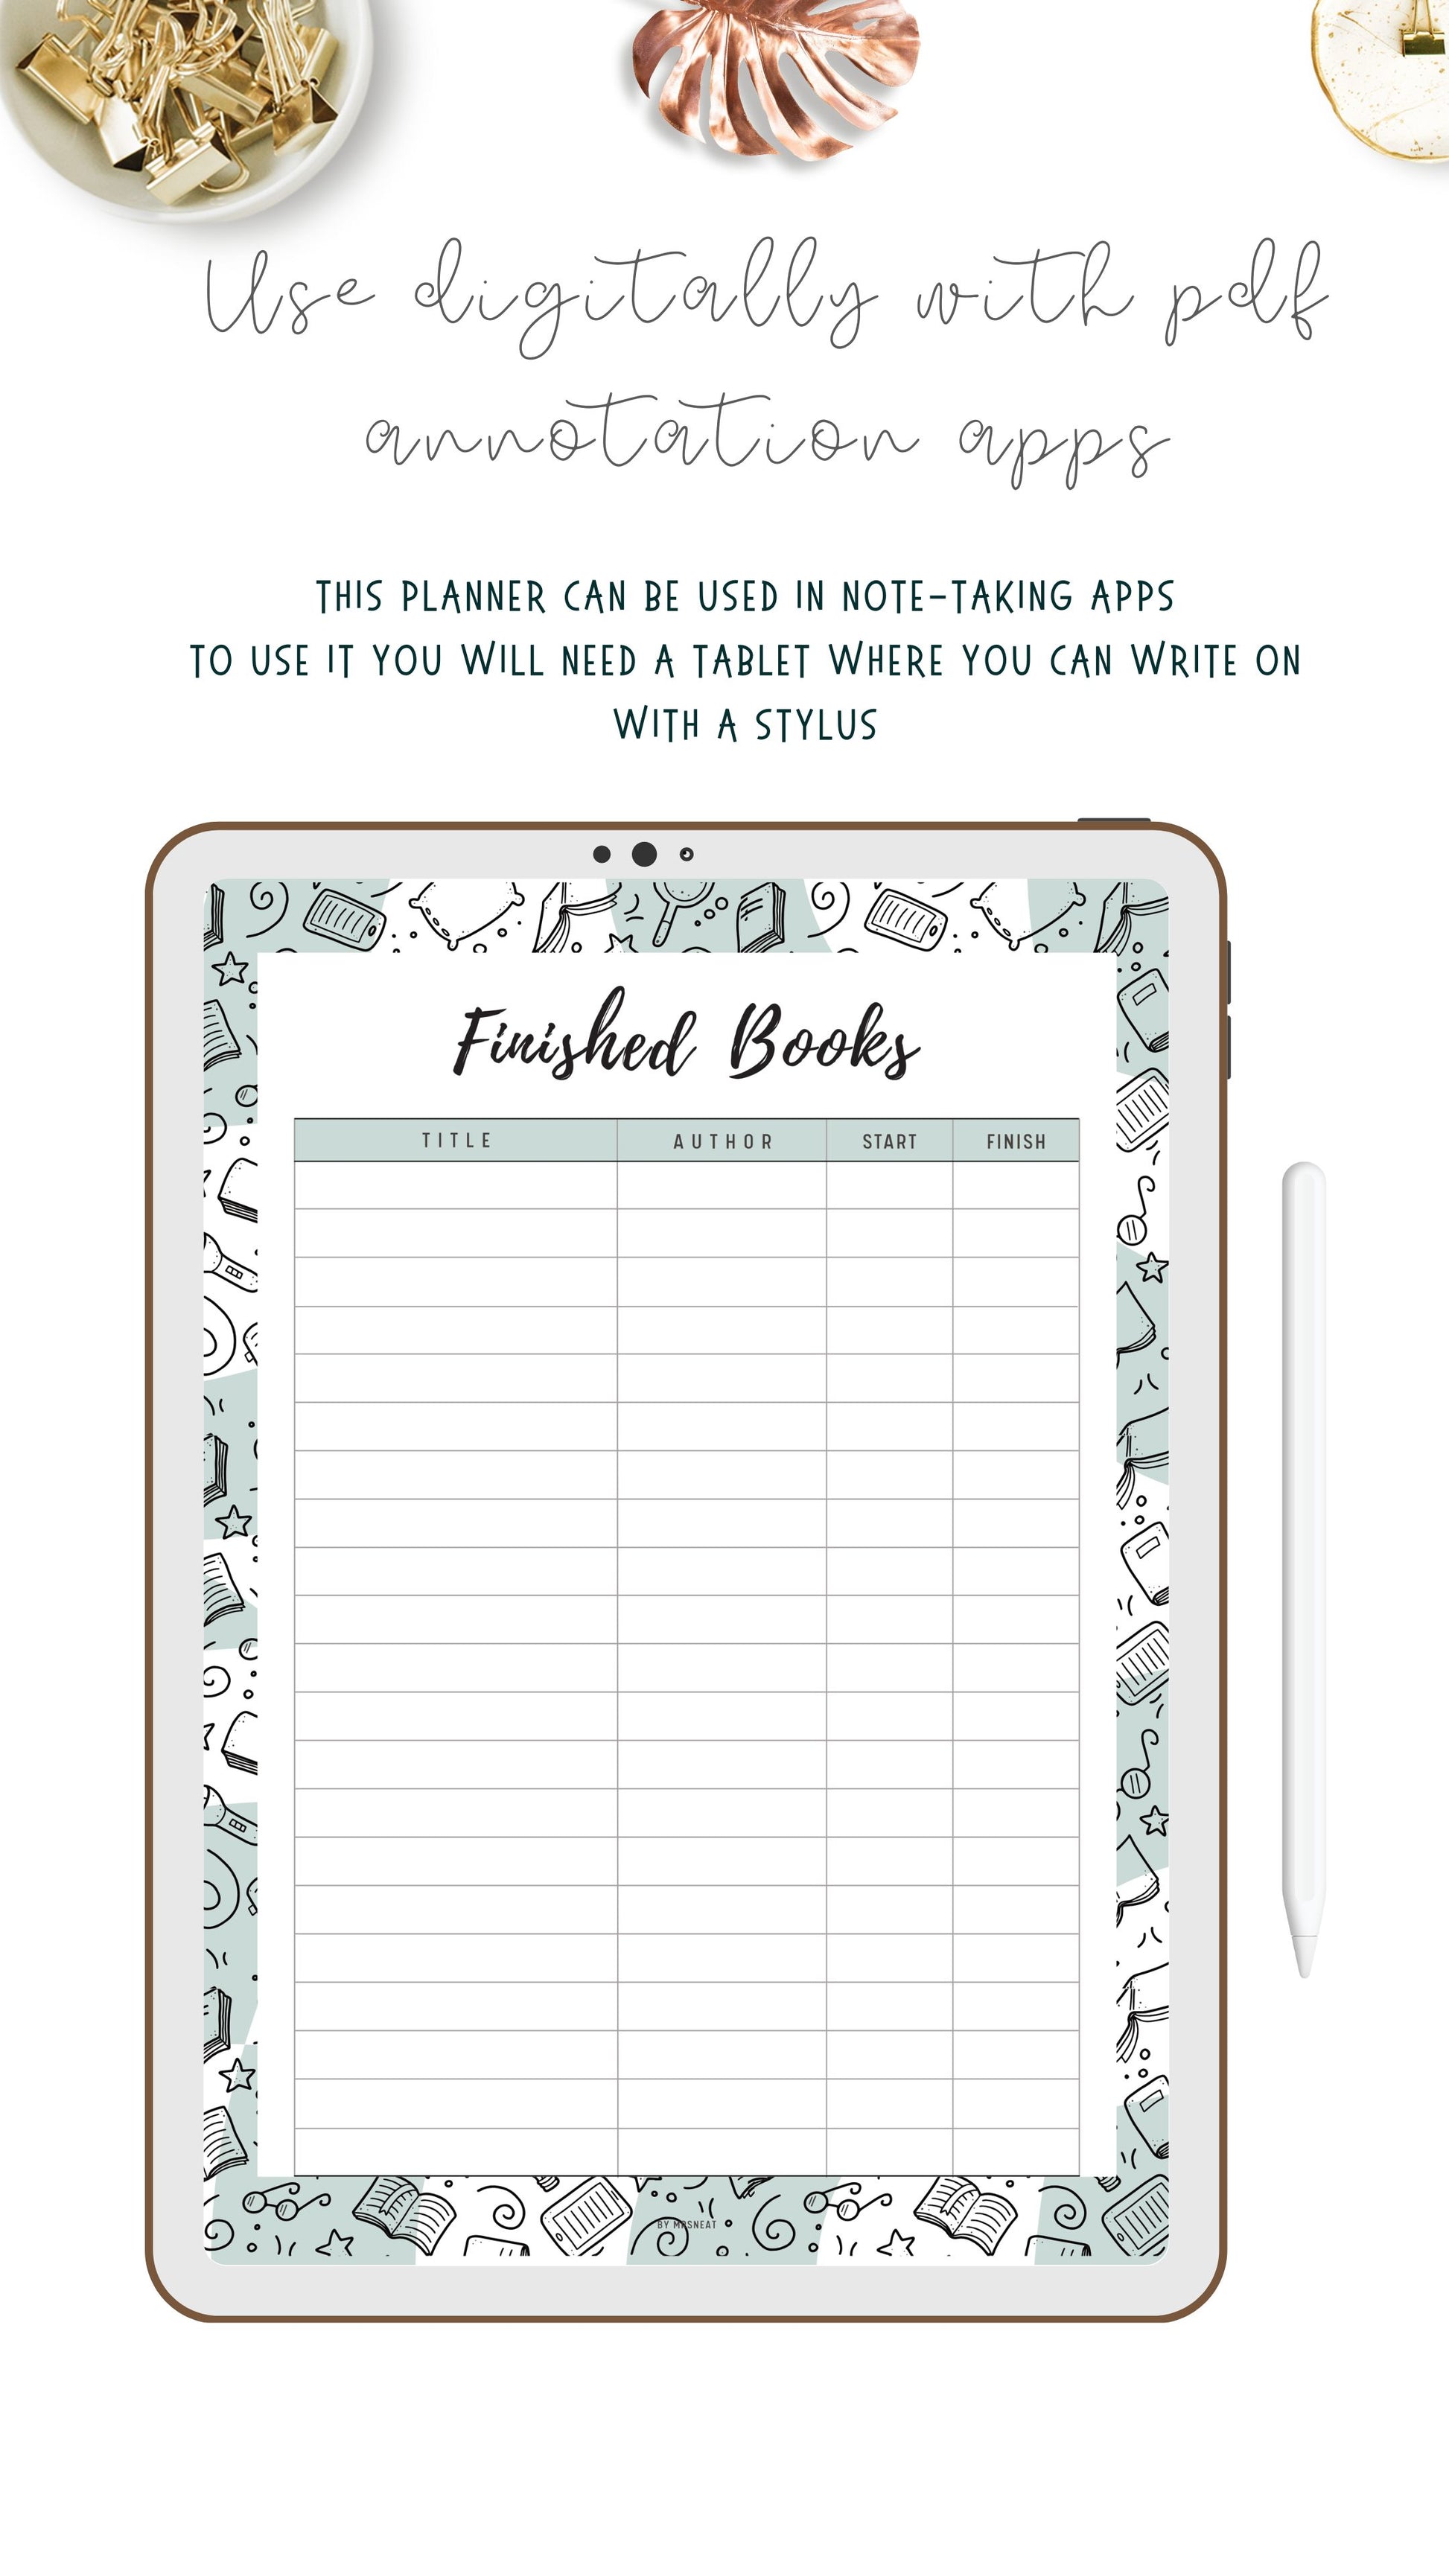 Books I Finished Template Printable, 5 colors ; Peach, Pink, Blue, Green, Neutral, 4 sizes ; A4, A5, Letter, Half Letter, Digital Planner